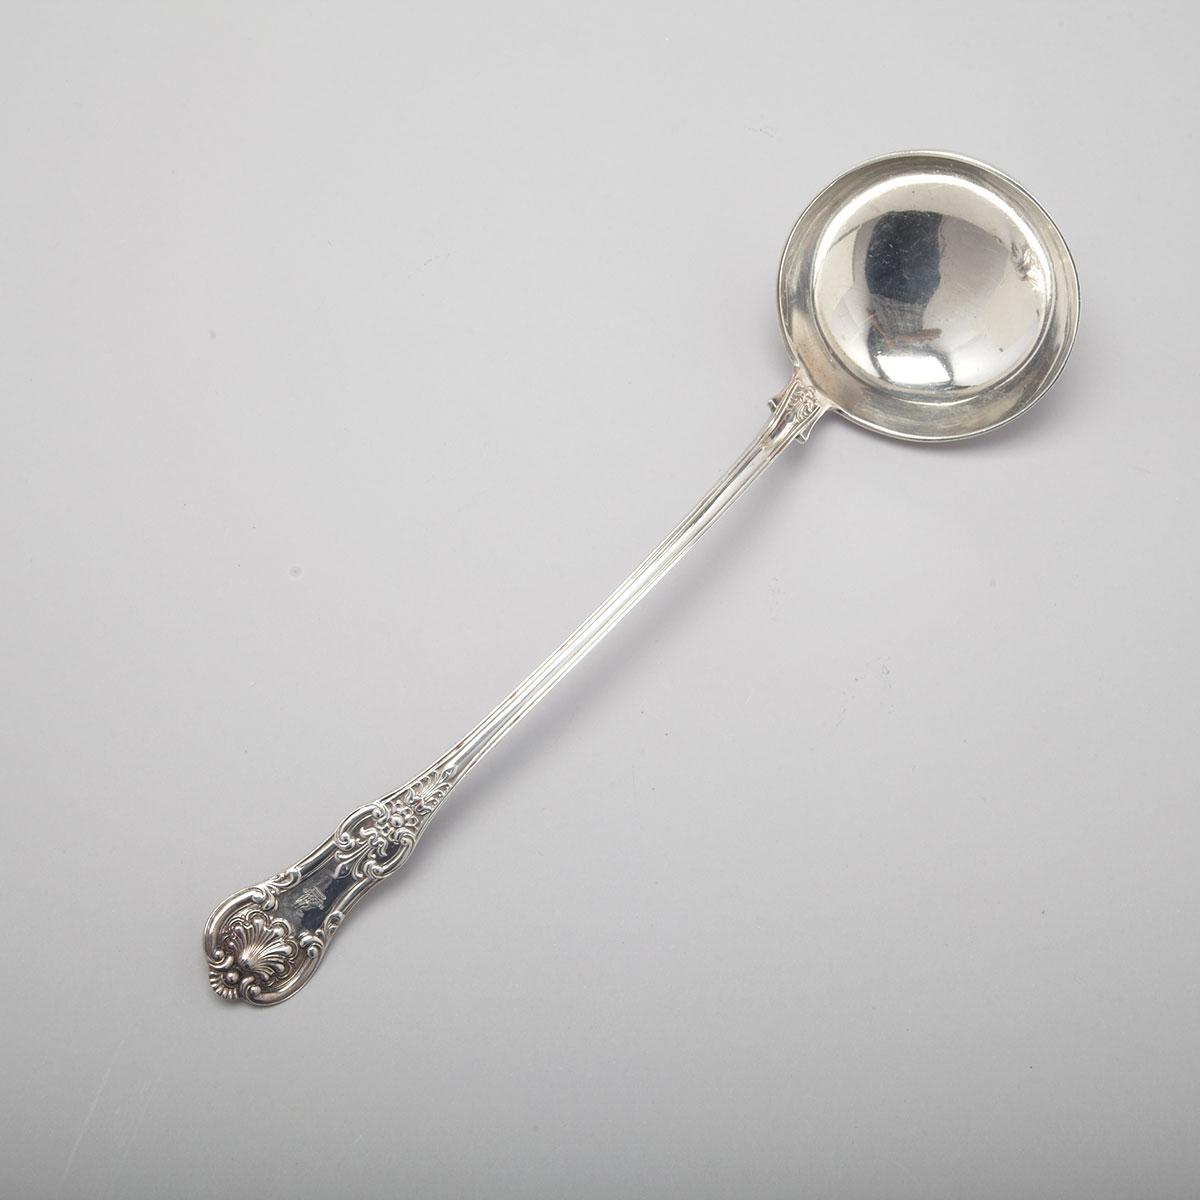 Victorian Scottish Silver Queens Pattern Soup Ladle, William Clark Shaw (probably), Glasgow, 1842